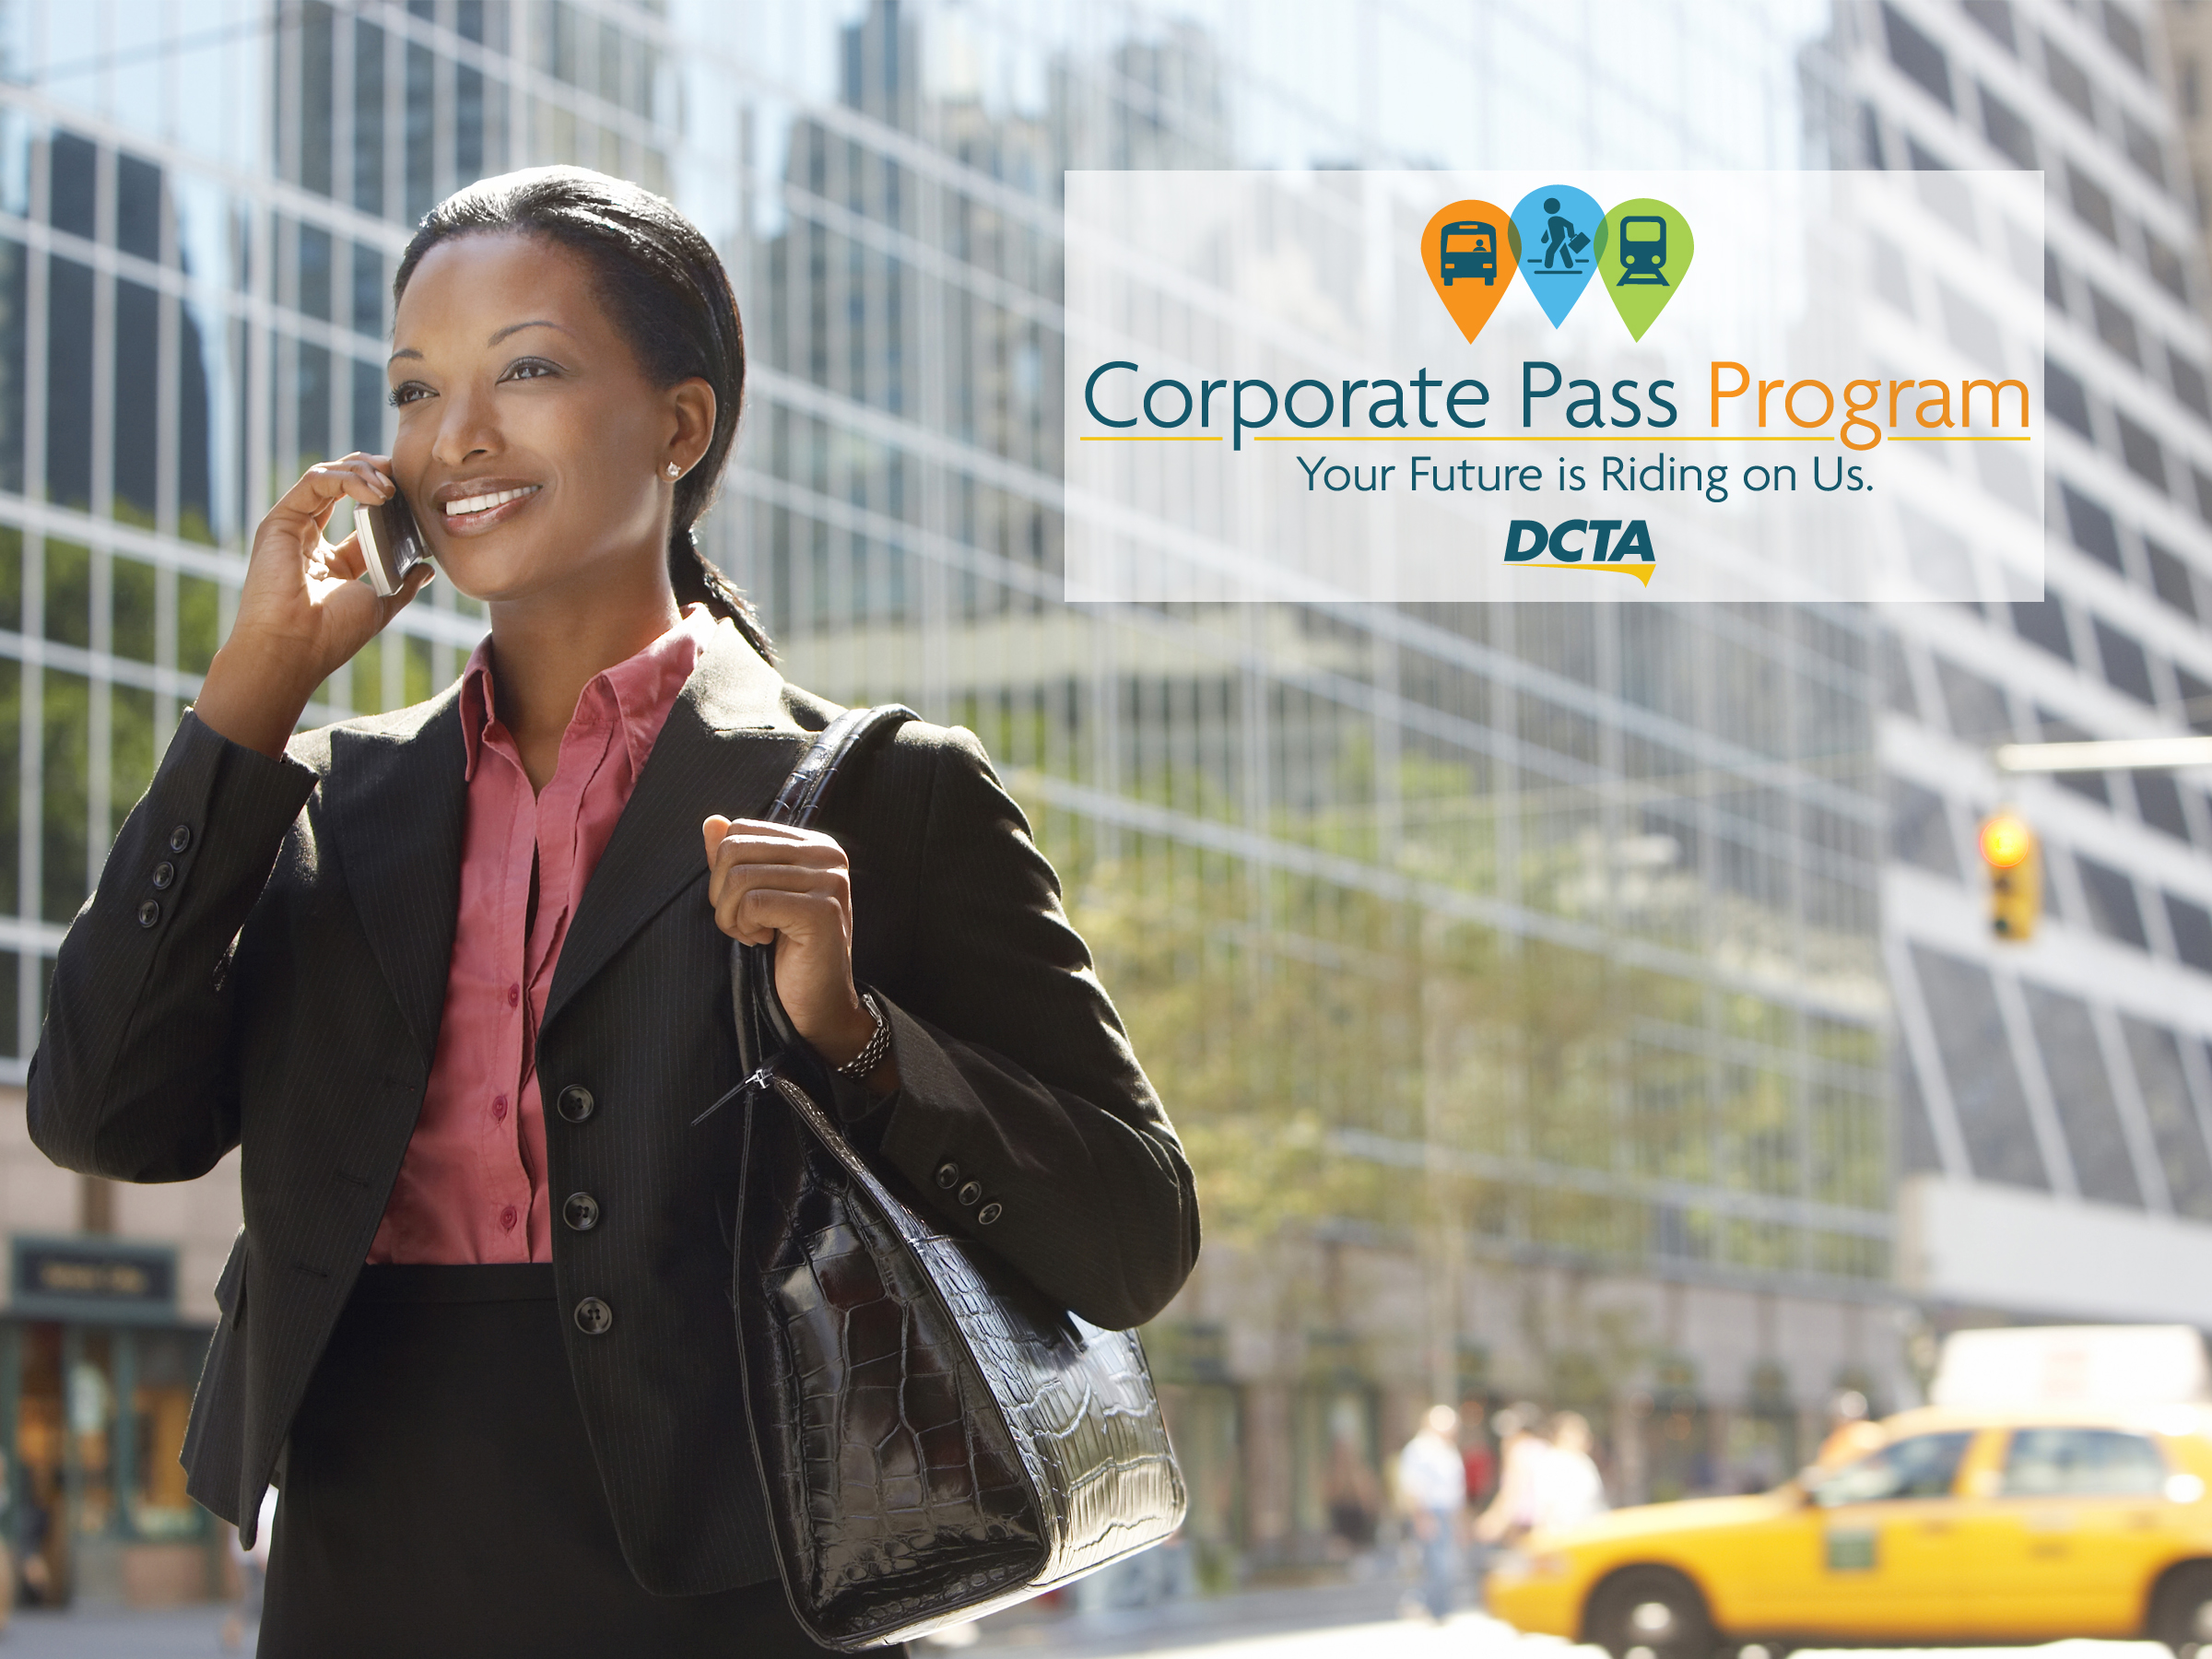 Corporate Pass Program: A New Way to Commute